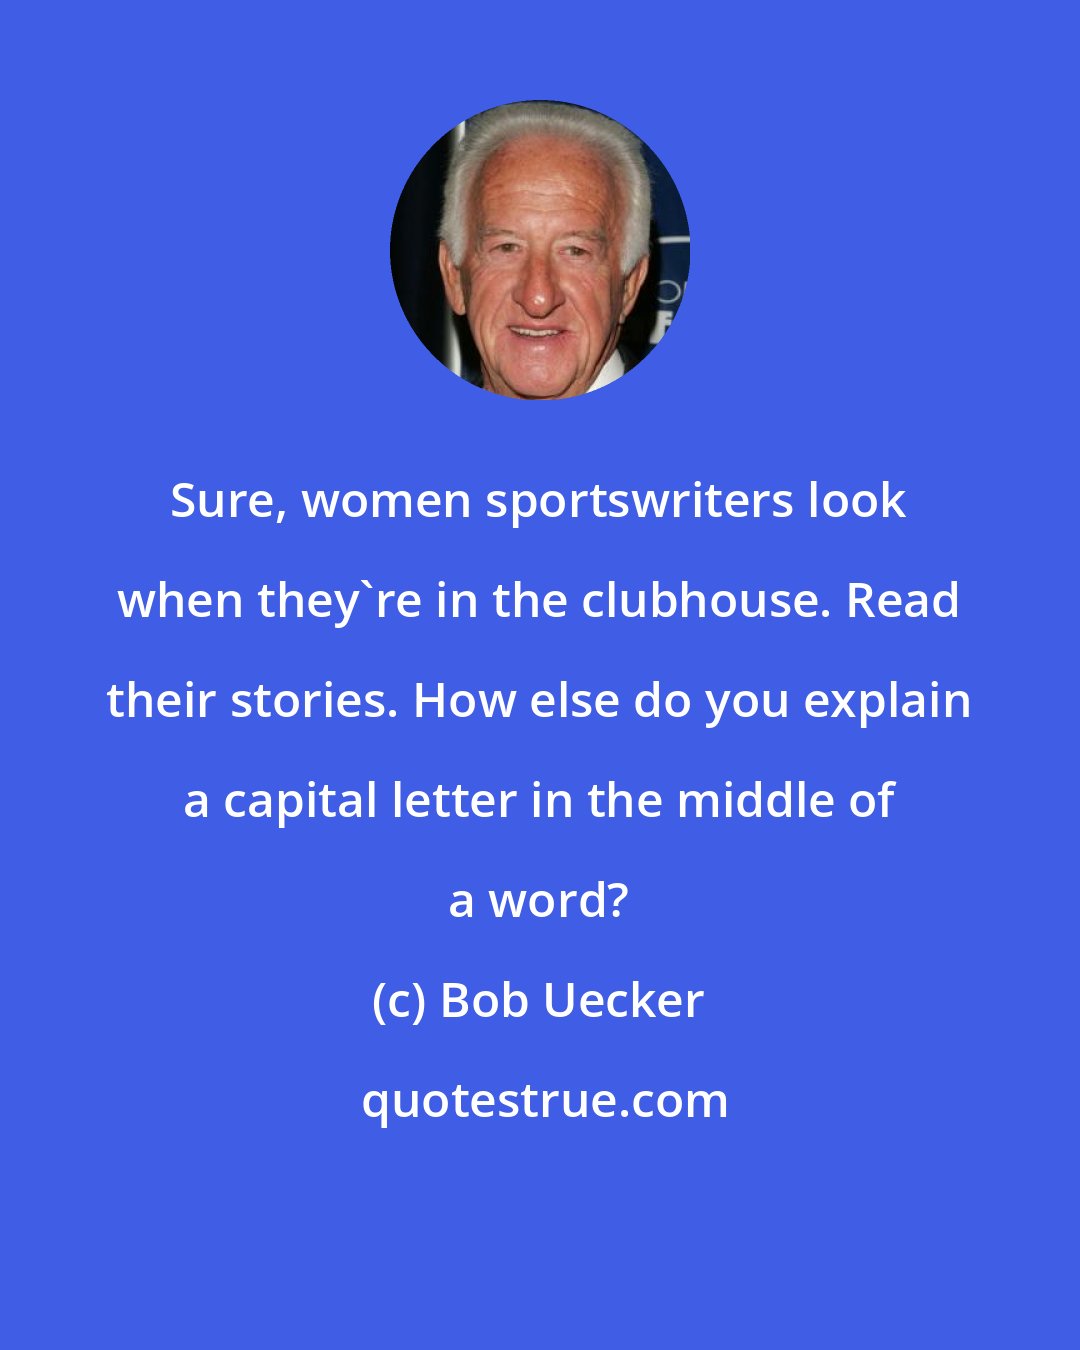 Bob Uecker: Sure, women sportswriters look when they're in the clubhouse. Read their stories. How else do you explain a capital letter in the middle of a word?